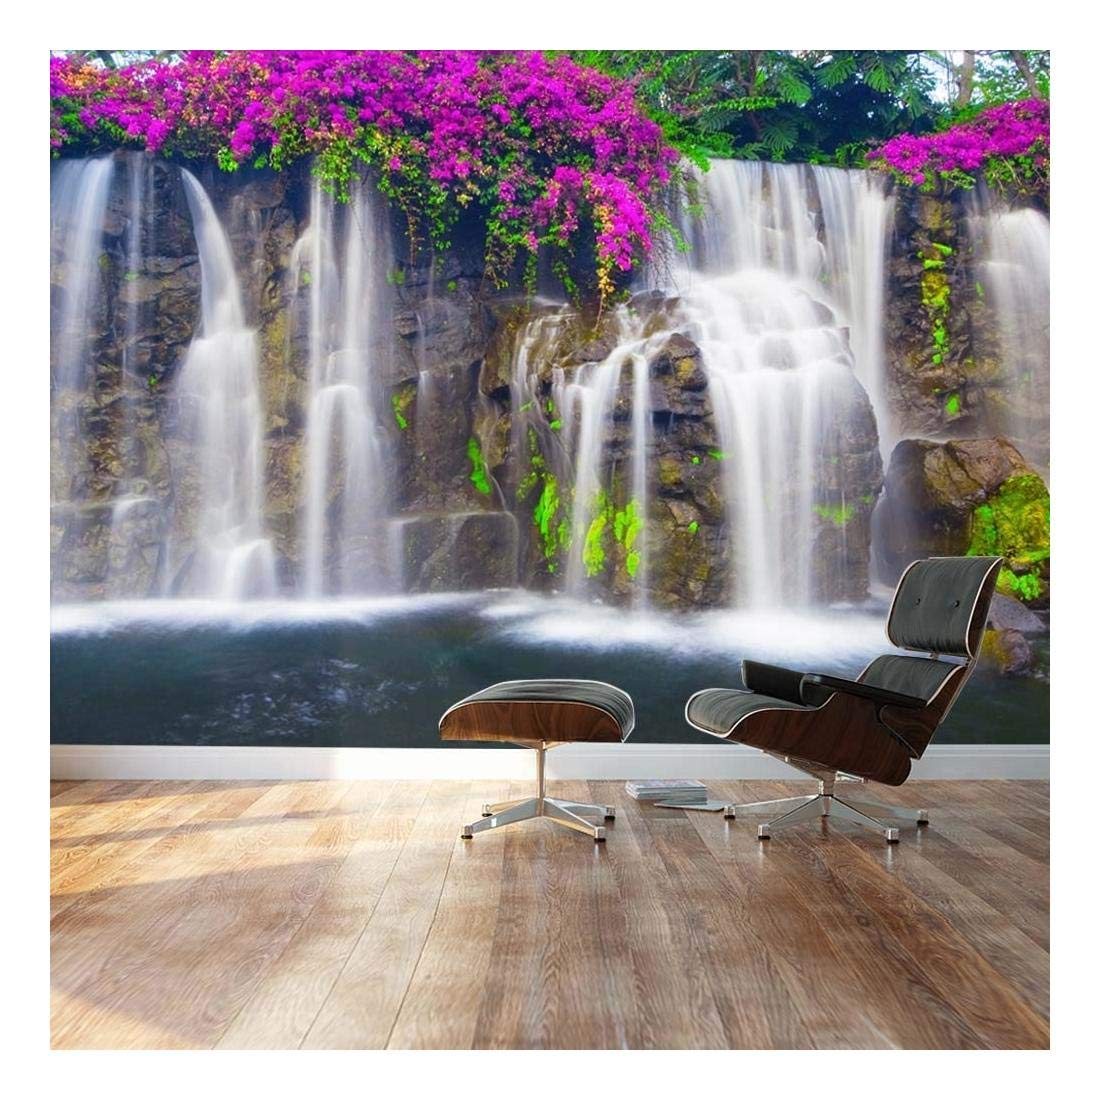 Amazon - Com - Wall26 - Self-adhesive Wallpaper Large - Good Morning Photos With Waterfalls , HD Wallpaper & Backgrounds